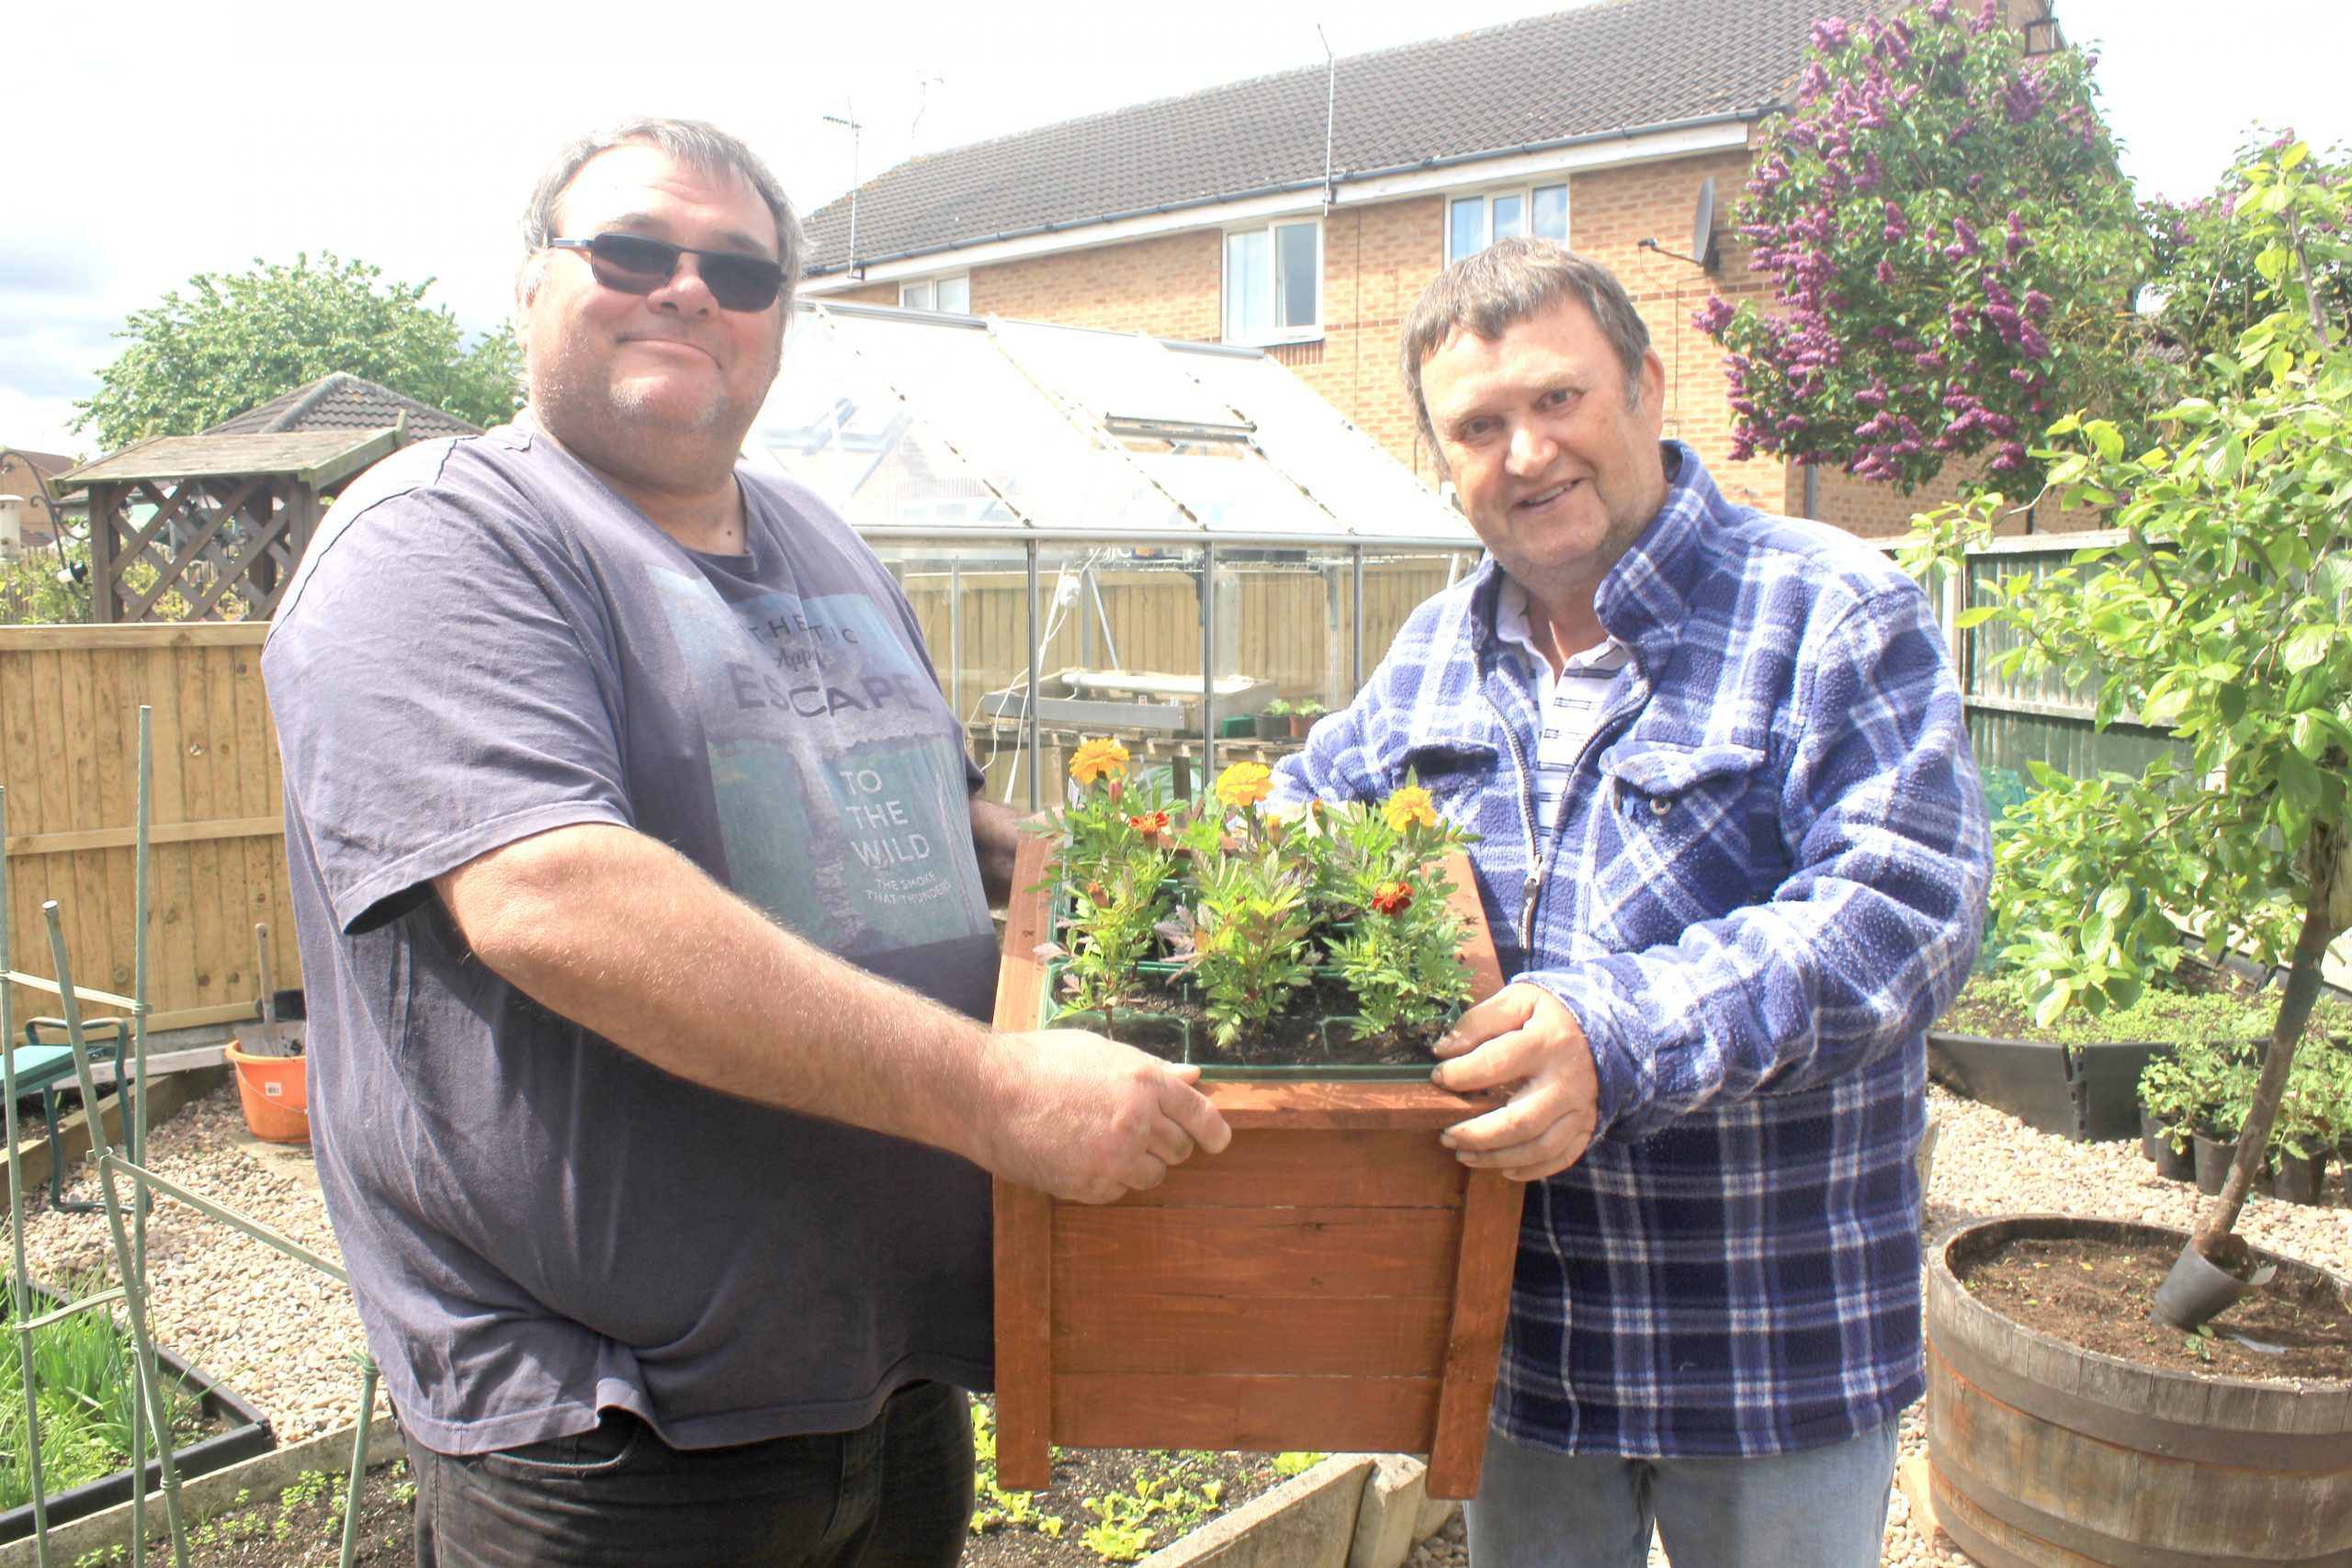 Two men holing a planter filled with flowers. they are in a garden with a greenhouse.